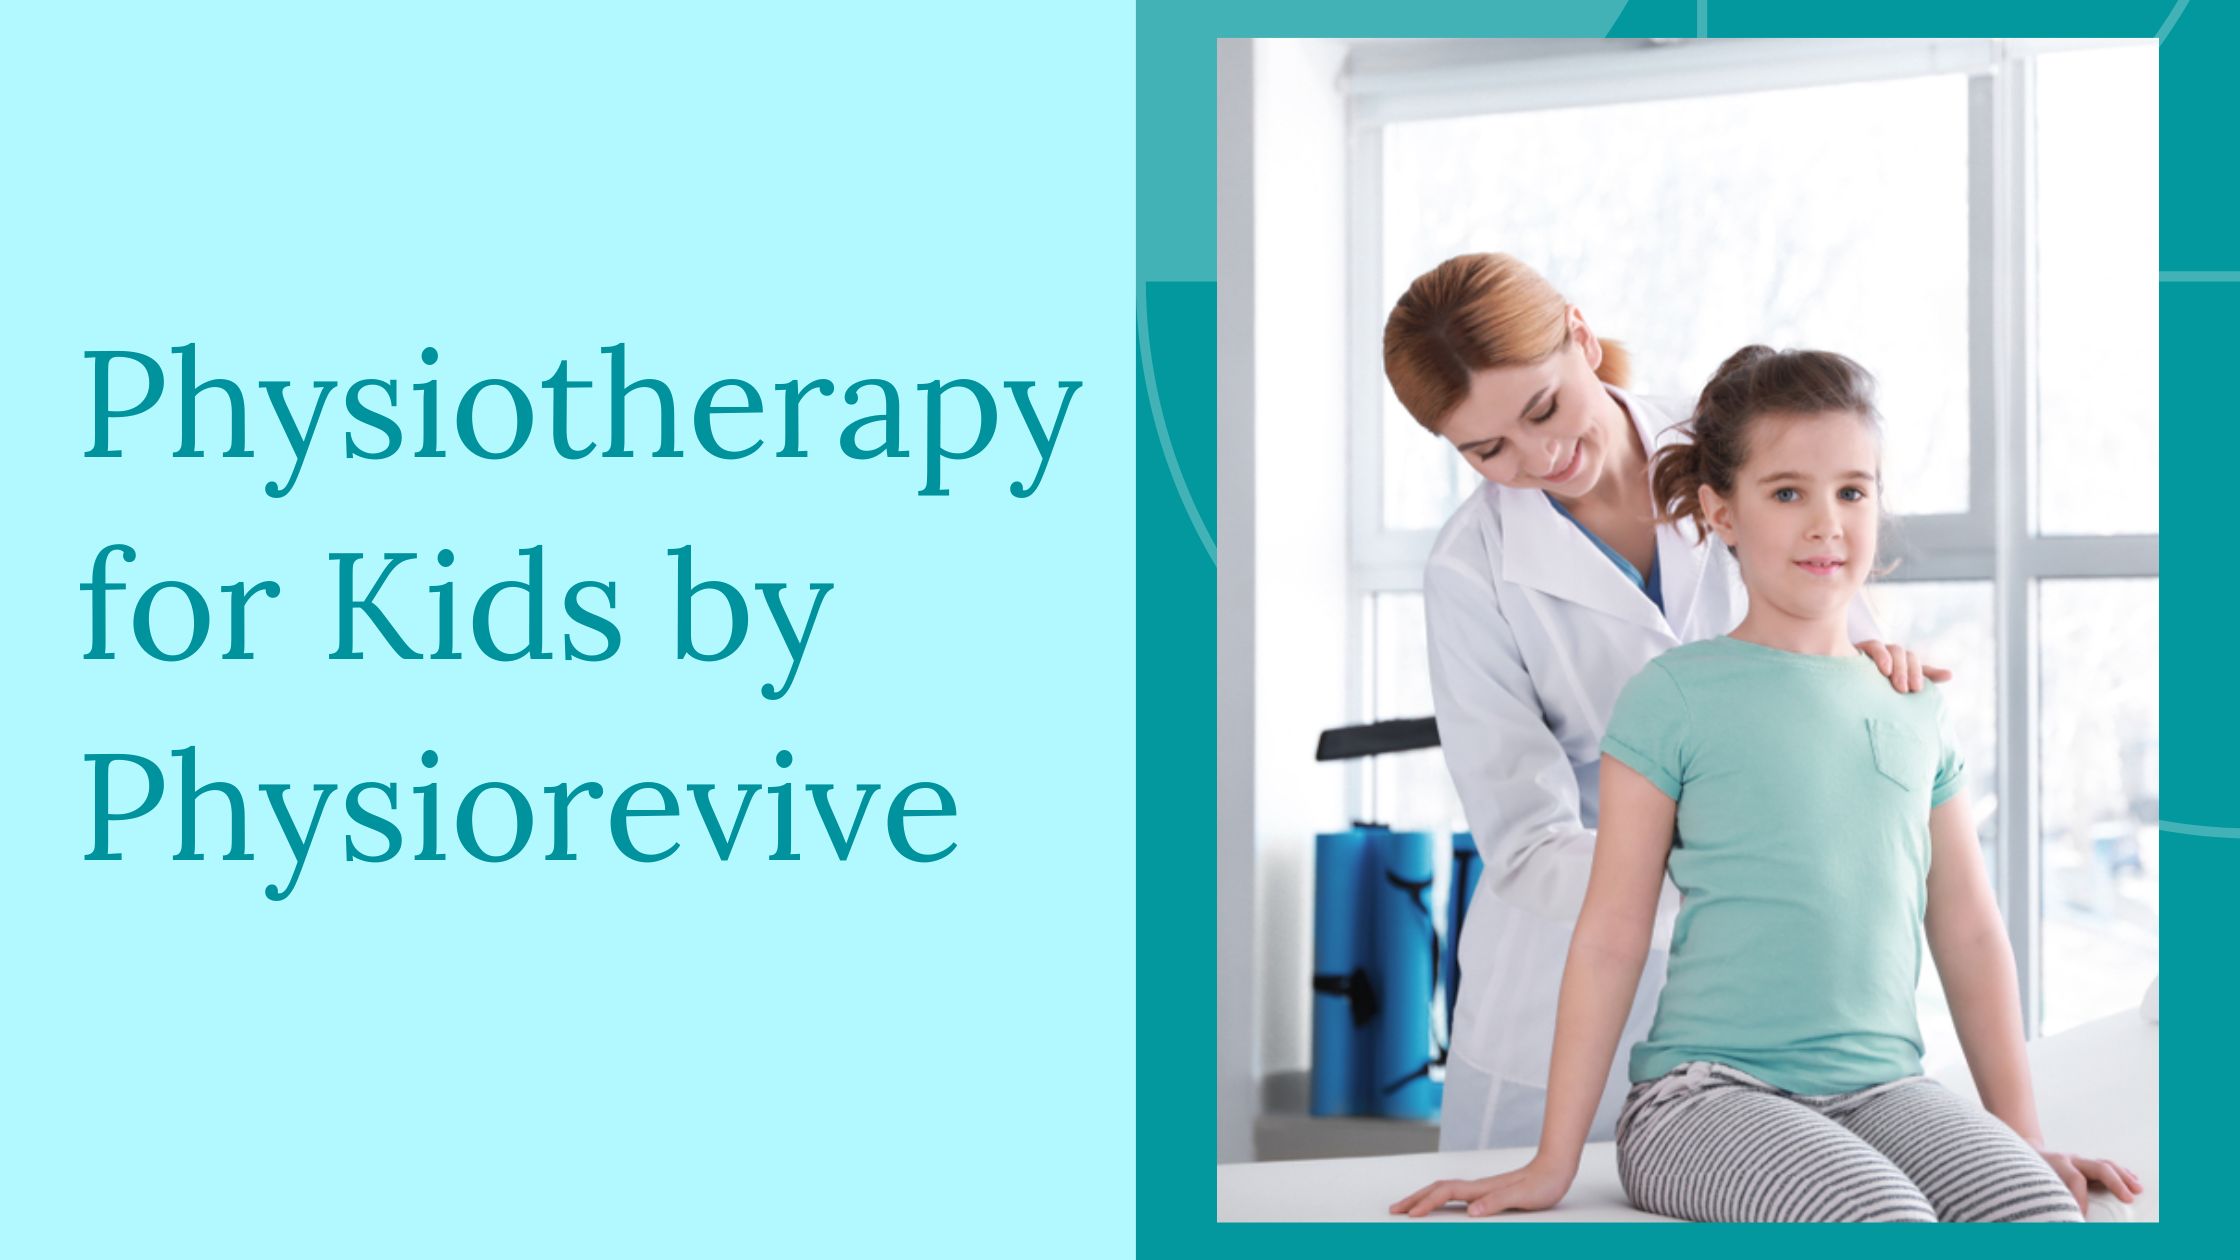 Physiotherapy for Kids by Physiorevive